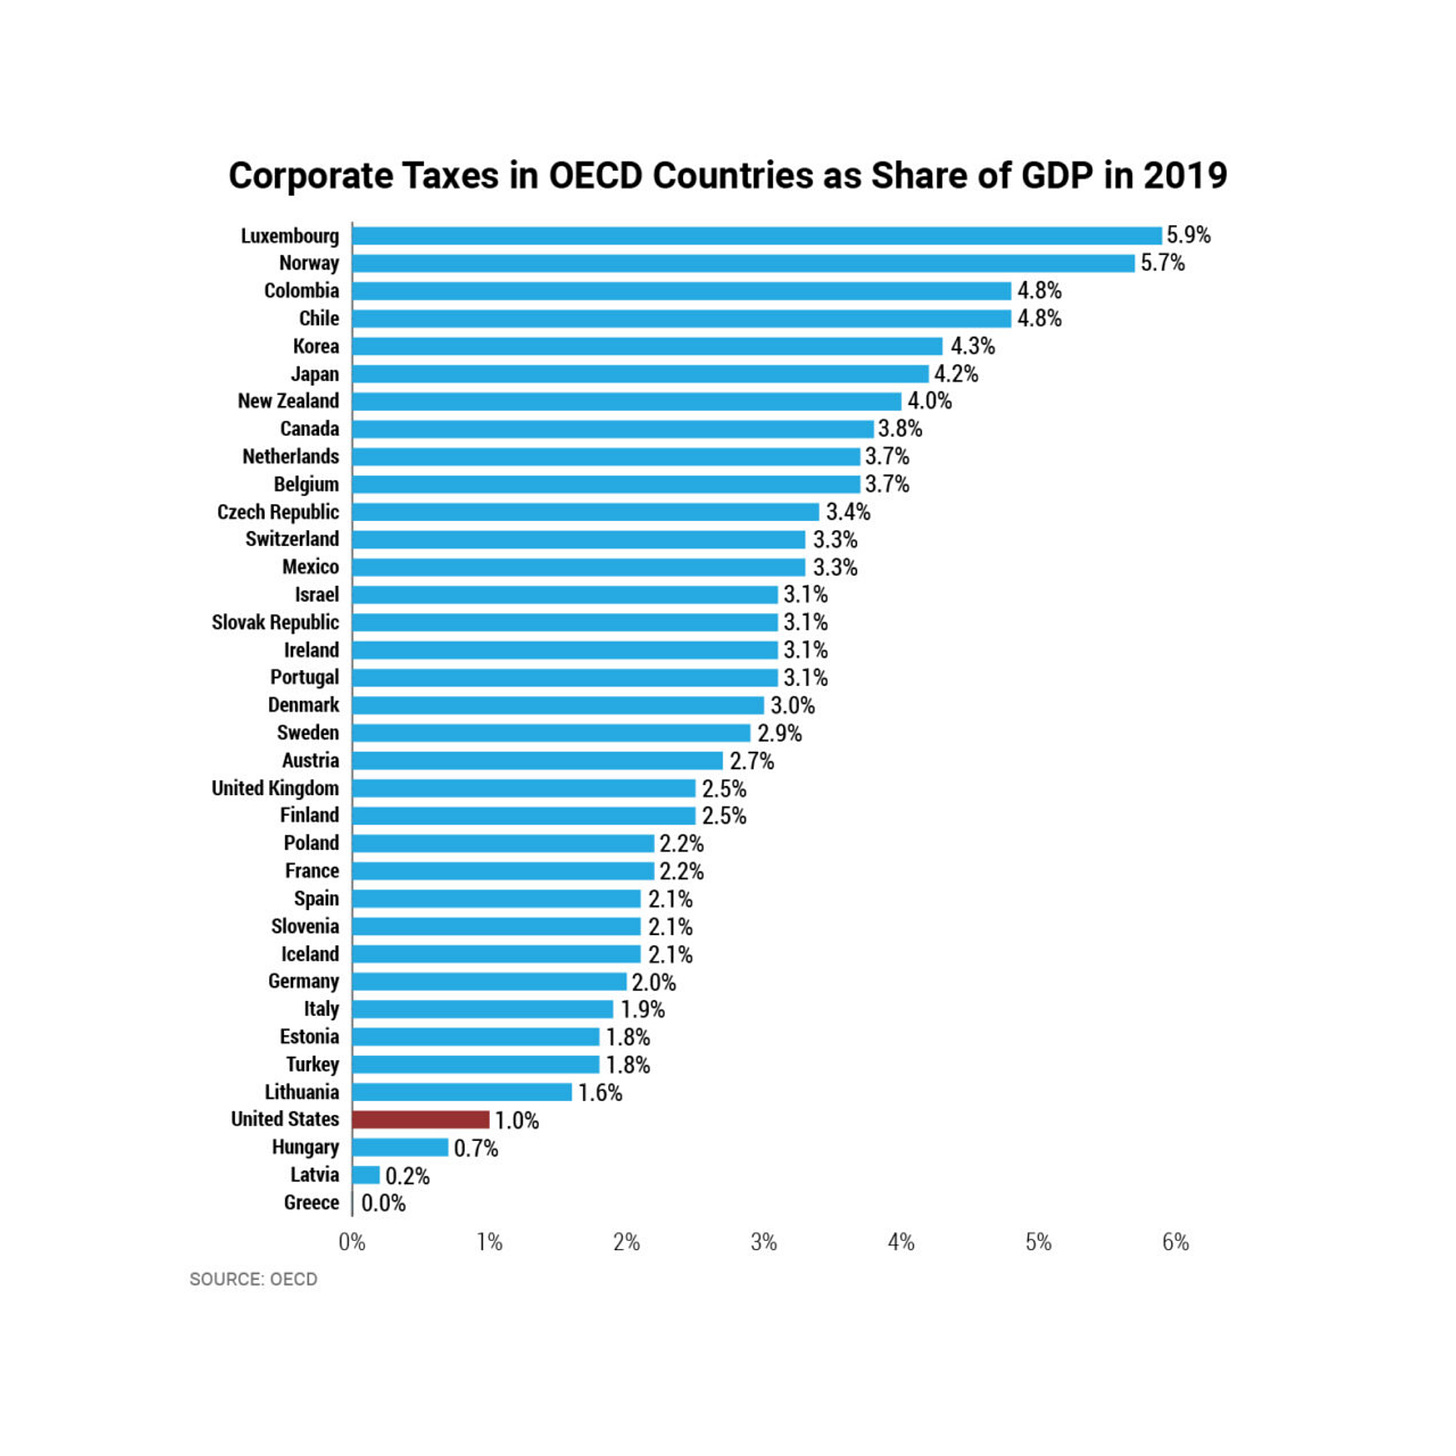 May be an image of text that says 'Luxembourg Corporate Taxes in OECD Countries as Share of GDP in 2019 Colombia Korea New Canada Netherlands 5.9% 5.7% 4.8% 4.8% Czech CzechRepublic Switzerland 4.3% 4.2% 4.0% 3.8% 3.7% 3.7% 3.4% .3% .3% .1% 3.1% Denmark Sweden United 3.1% .0% 2.9% Spain 2.5% Germany 2.1% 2.1% 2.1% 29% Lithuania 1.6% .0% 0.7% 0.2% Greece 0.0% 0% SOURCE: OECD 1% 2% 3% 4% 6%'